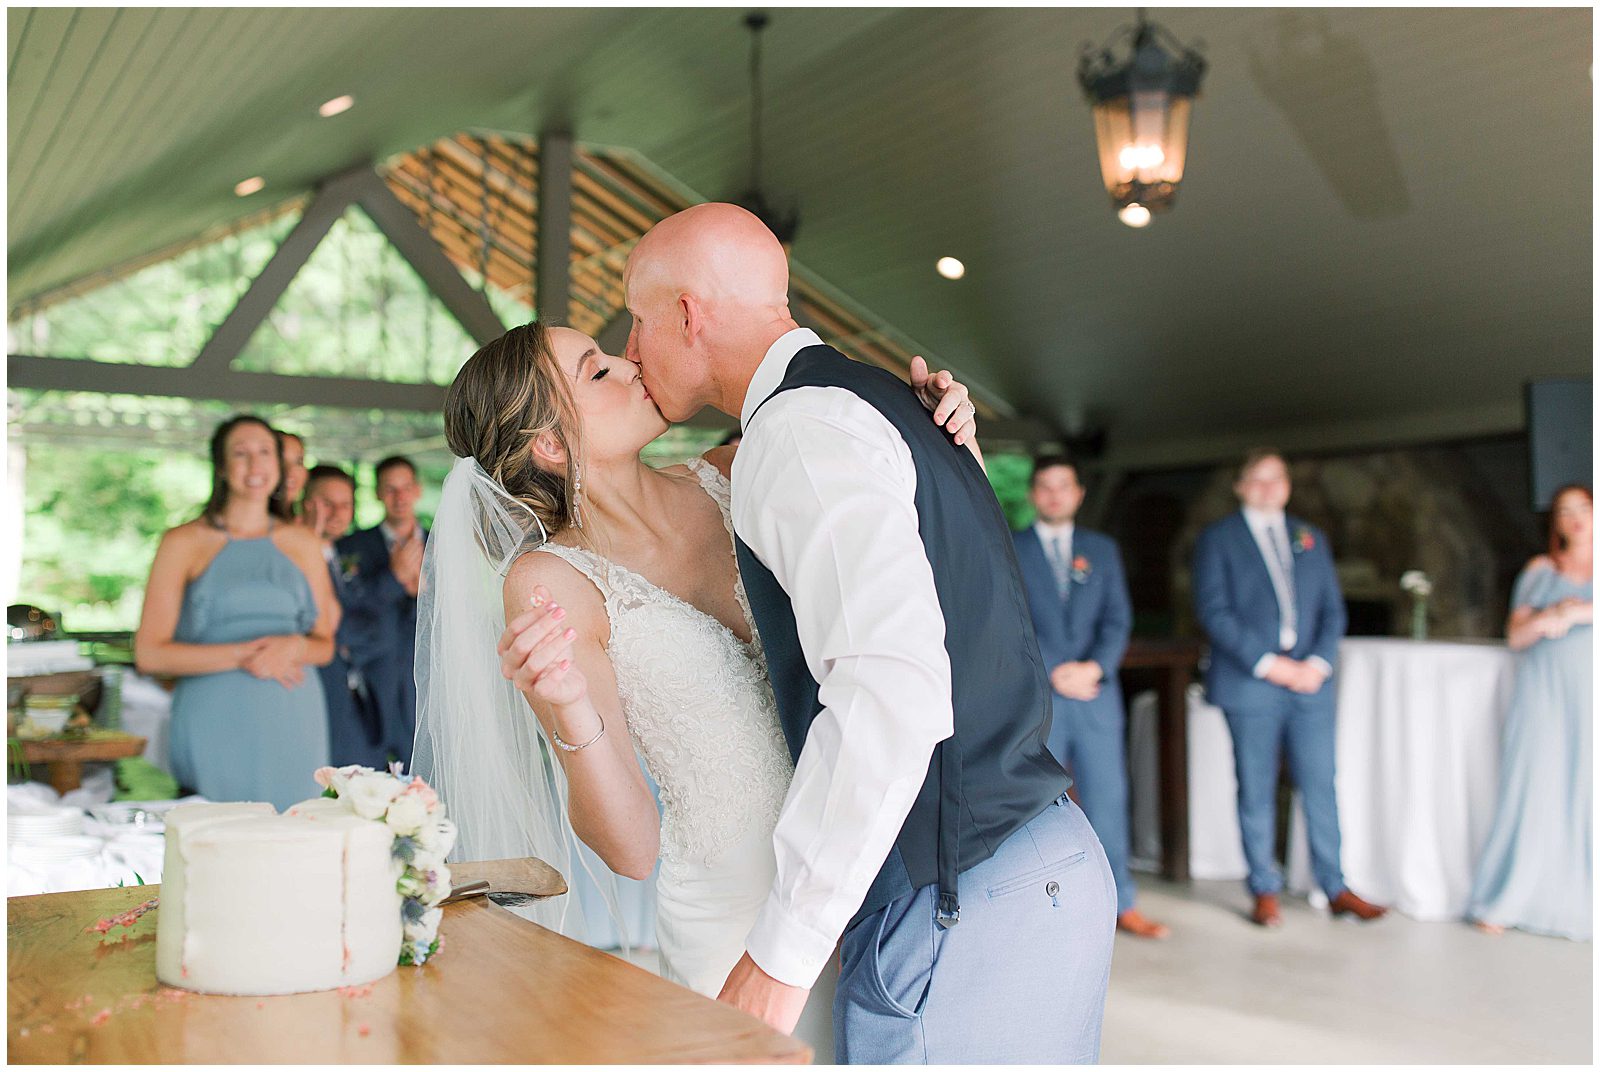 Bride and Groom Kissing After Cutting Cake Photo